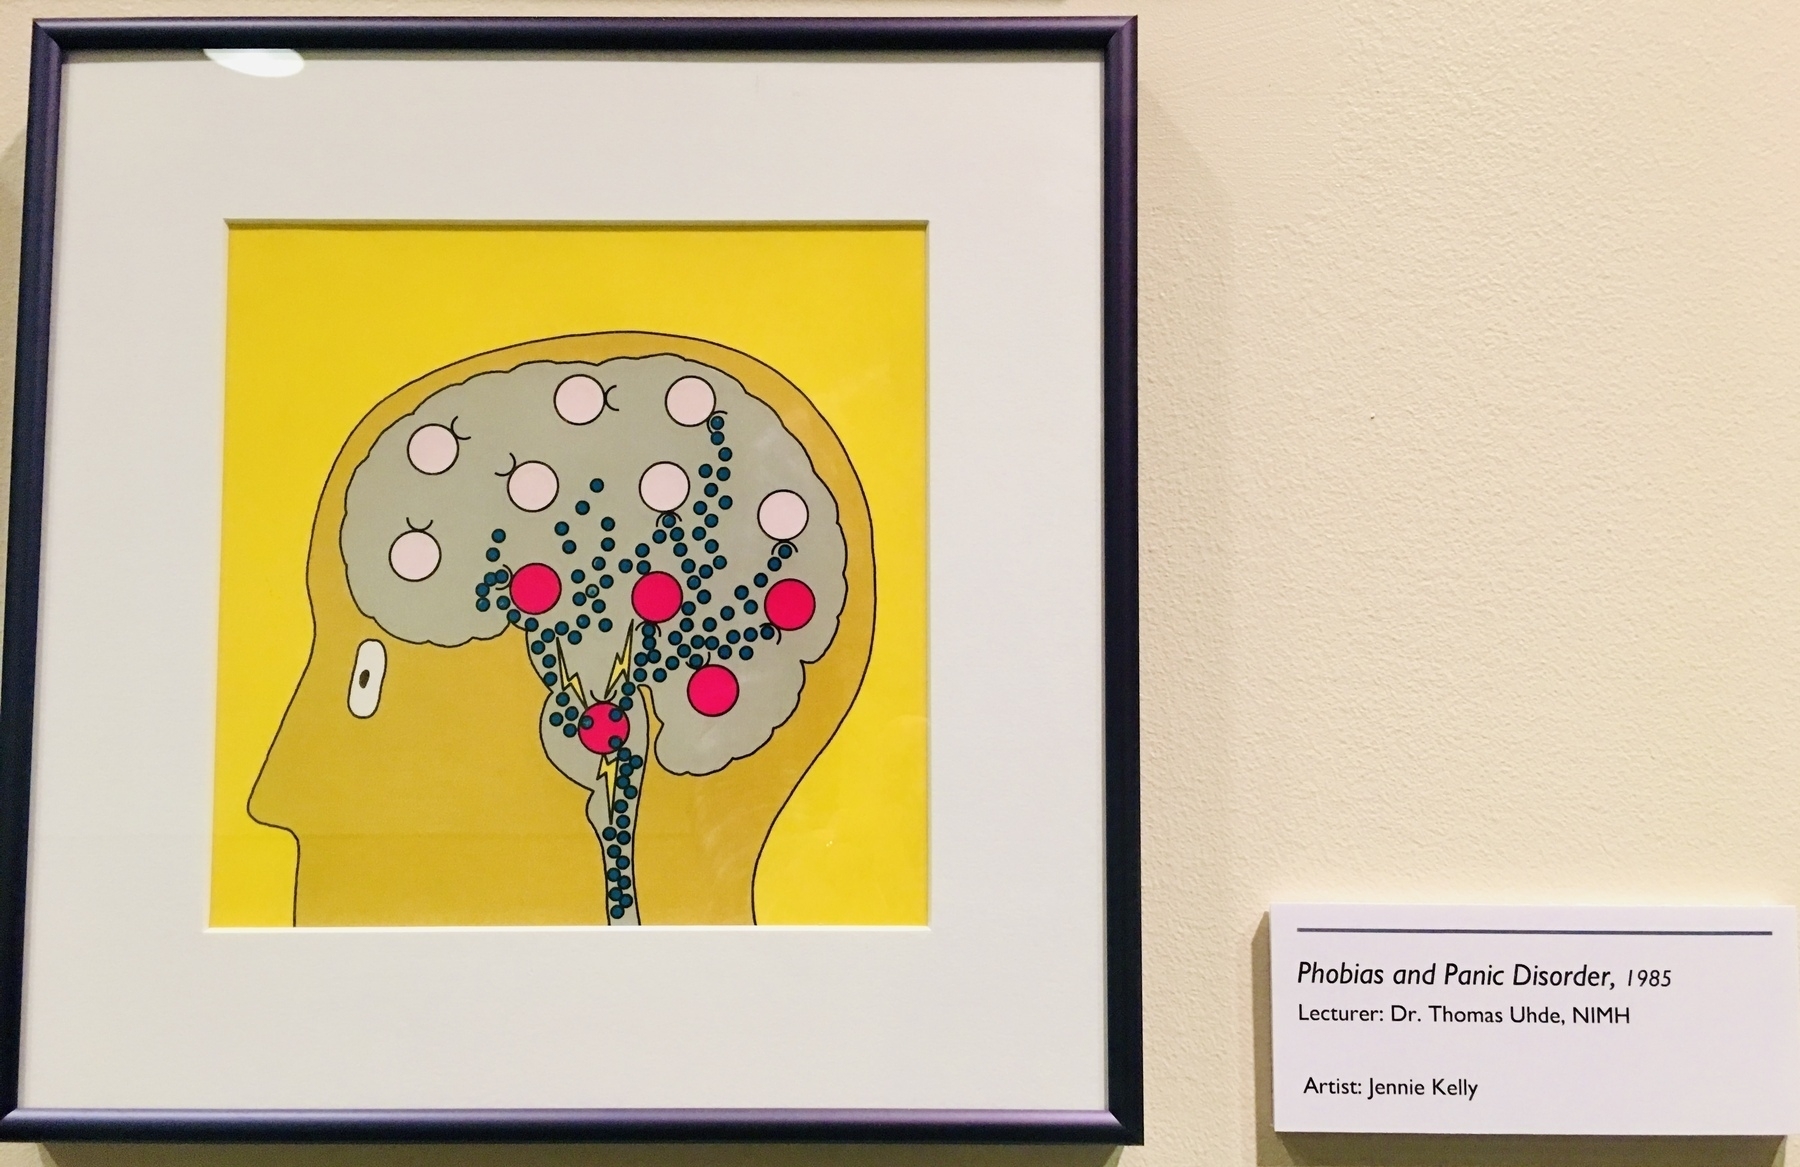 Photo of a framed cartoon drawing showing  a human profile with an overlayed brain covered in pale pink and red circles connected by green dots.